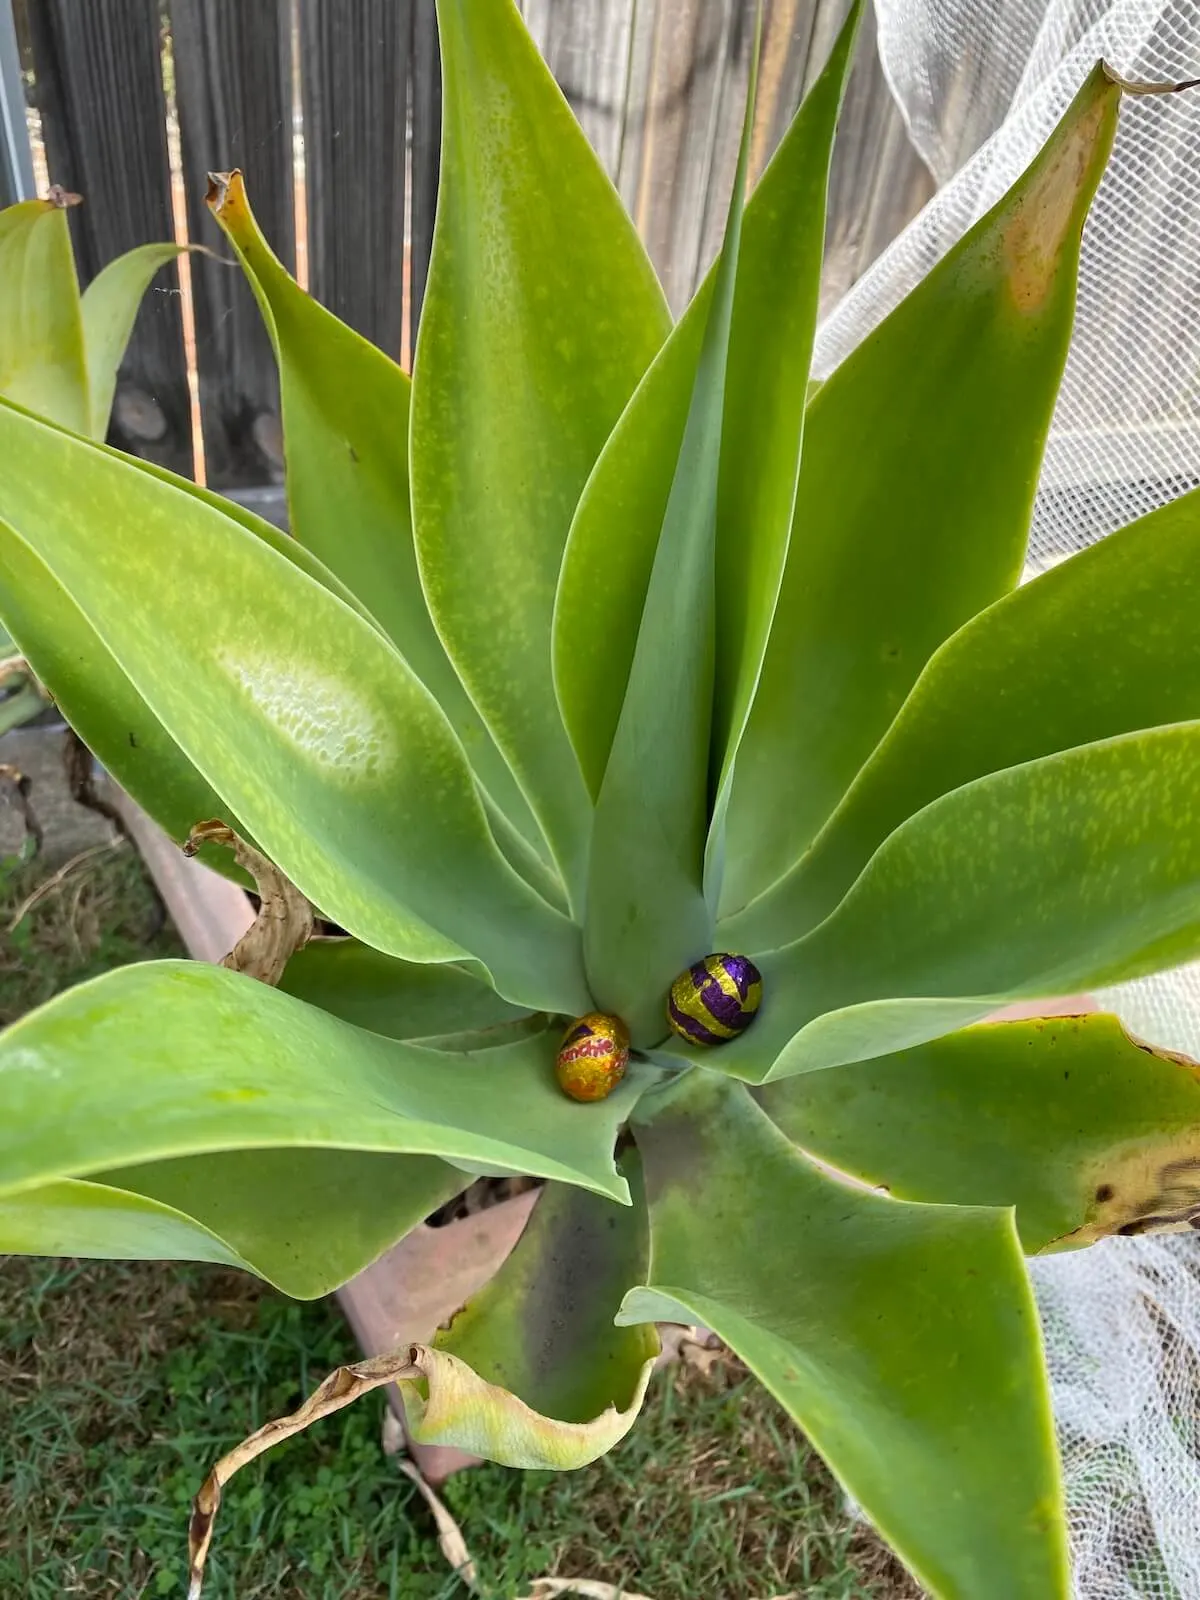 Easter eggs hidden in the leaves of an outdoor plant